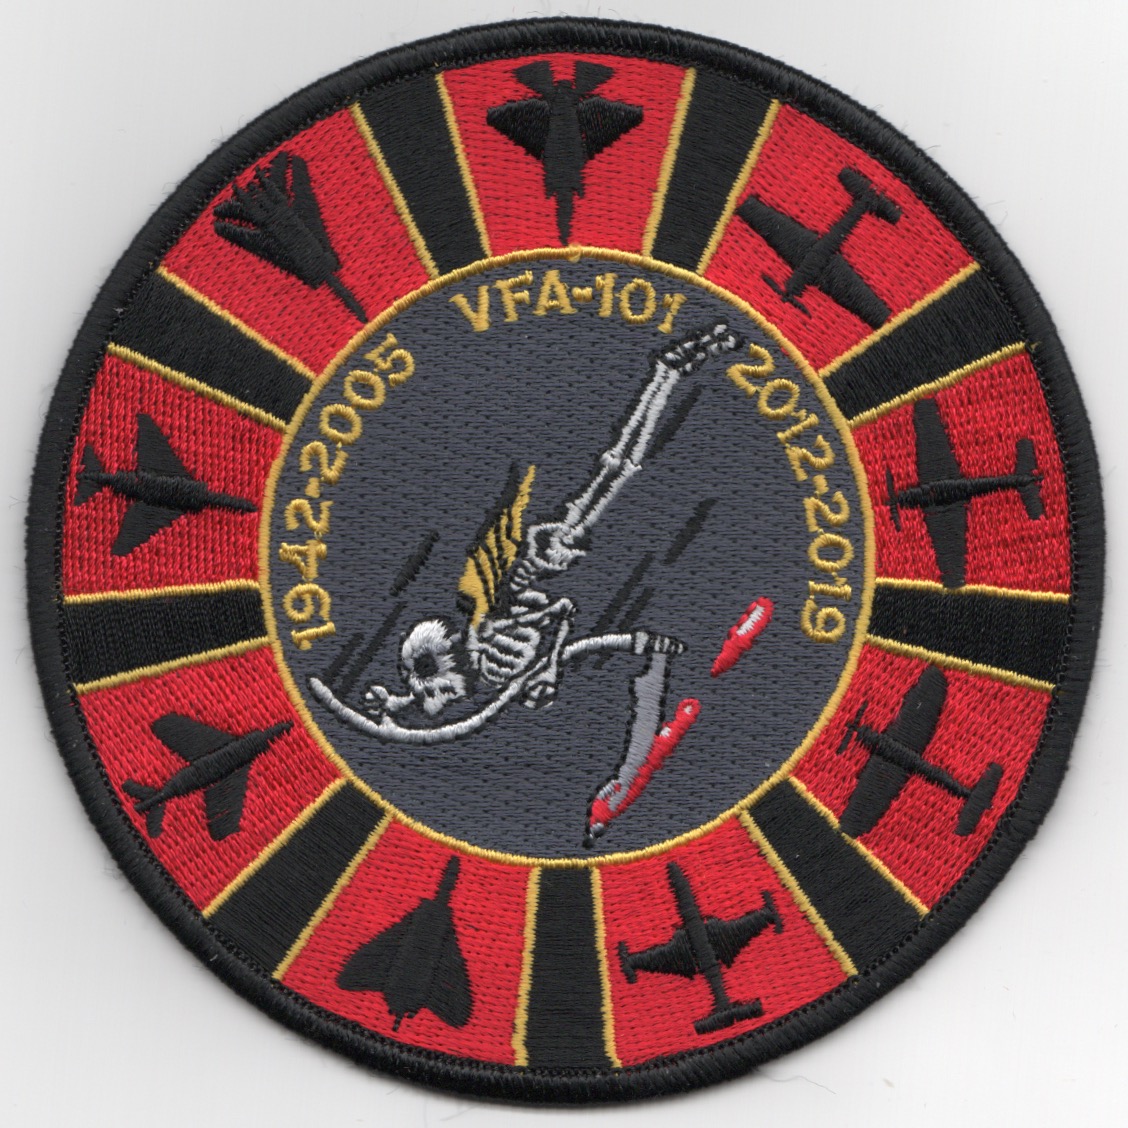 VFA-101 'DECOMMISSION' Patch (Red)